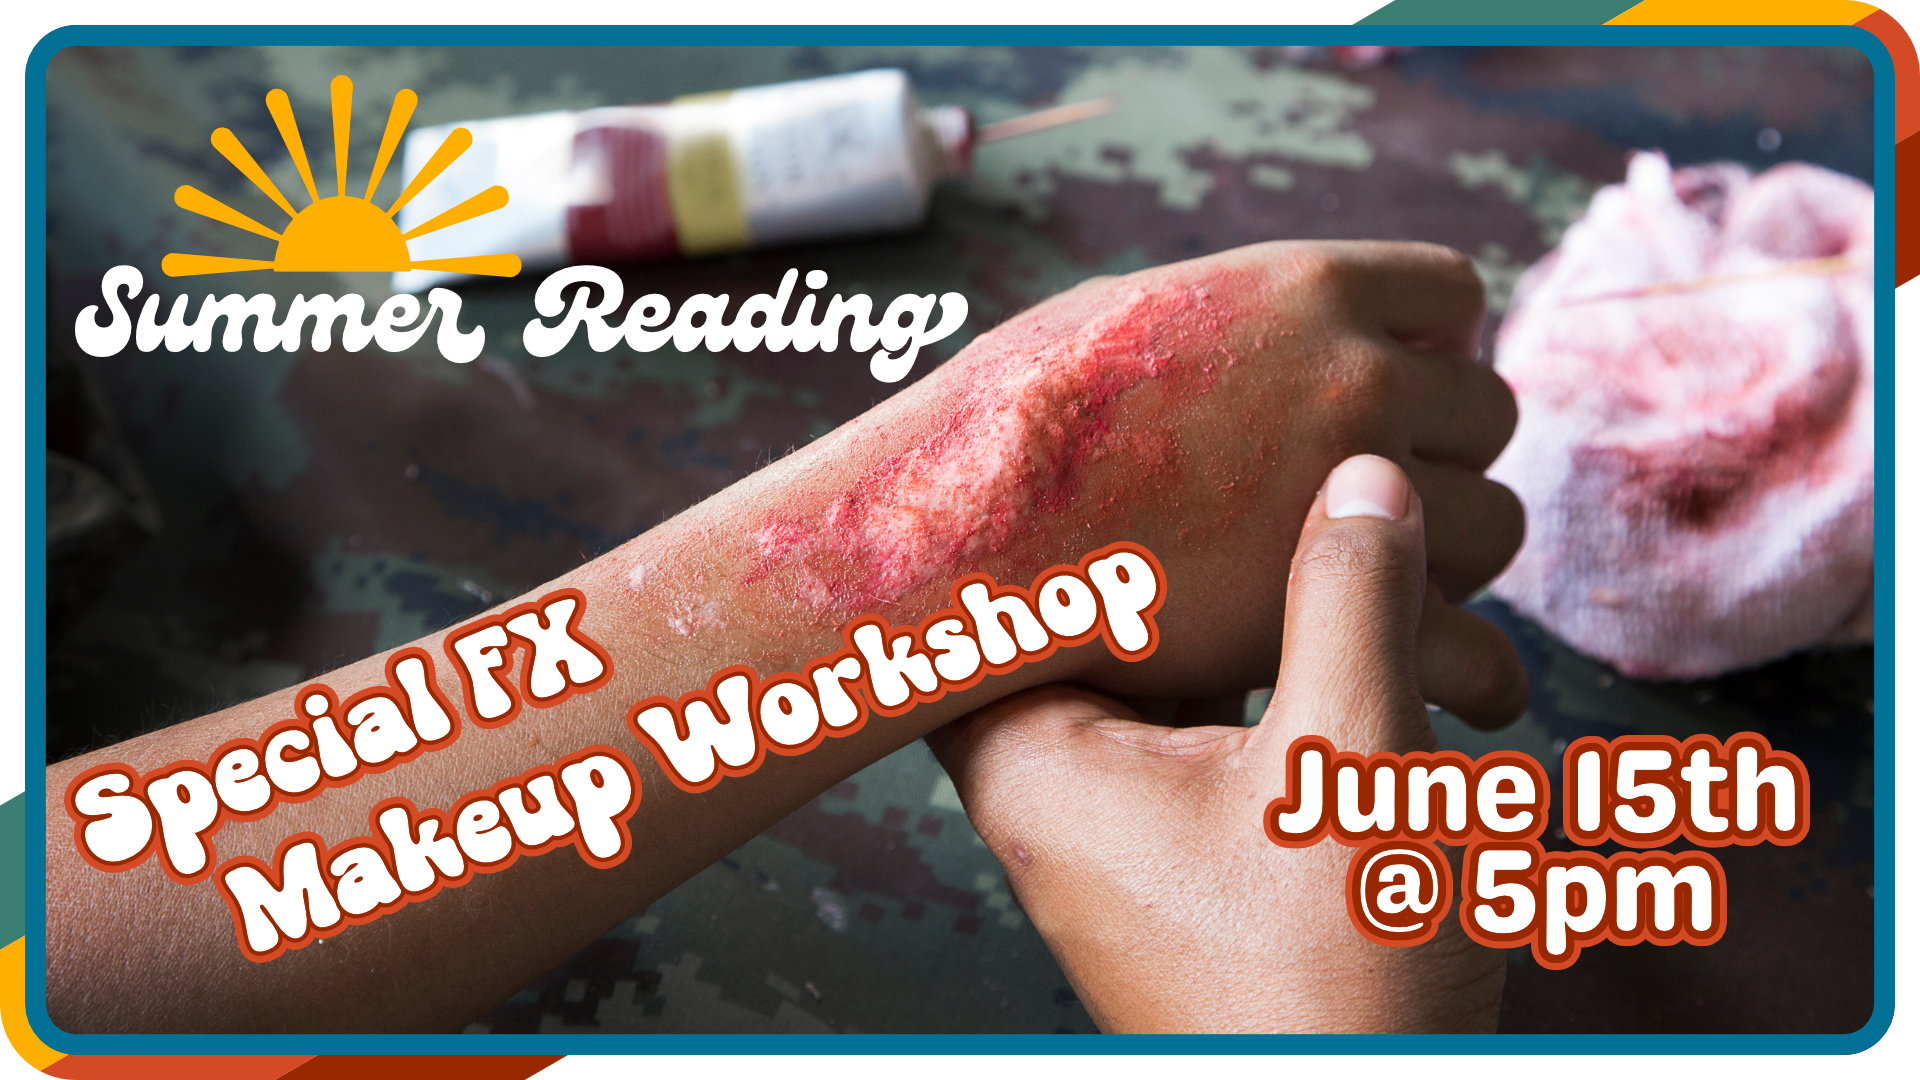 Summer Reading special effects makeup workshop for teens, June 15th at 5pm